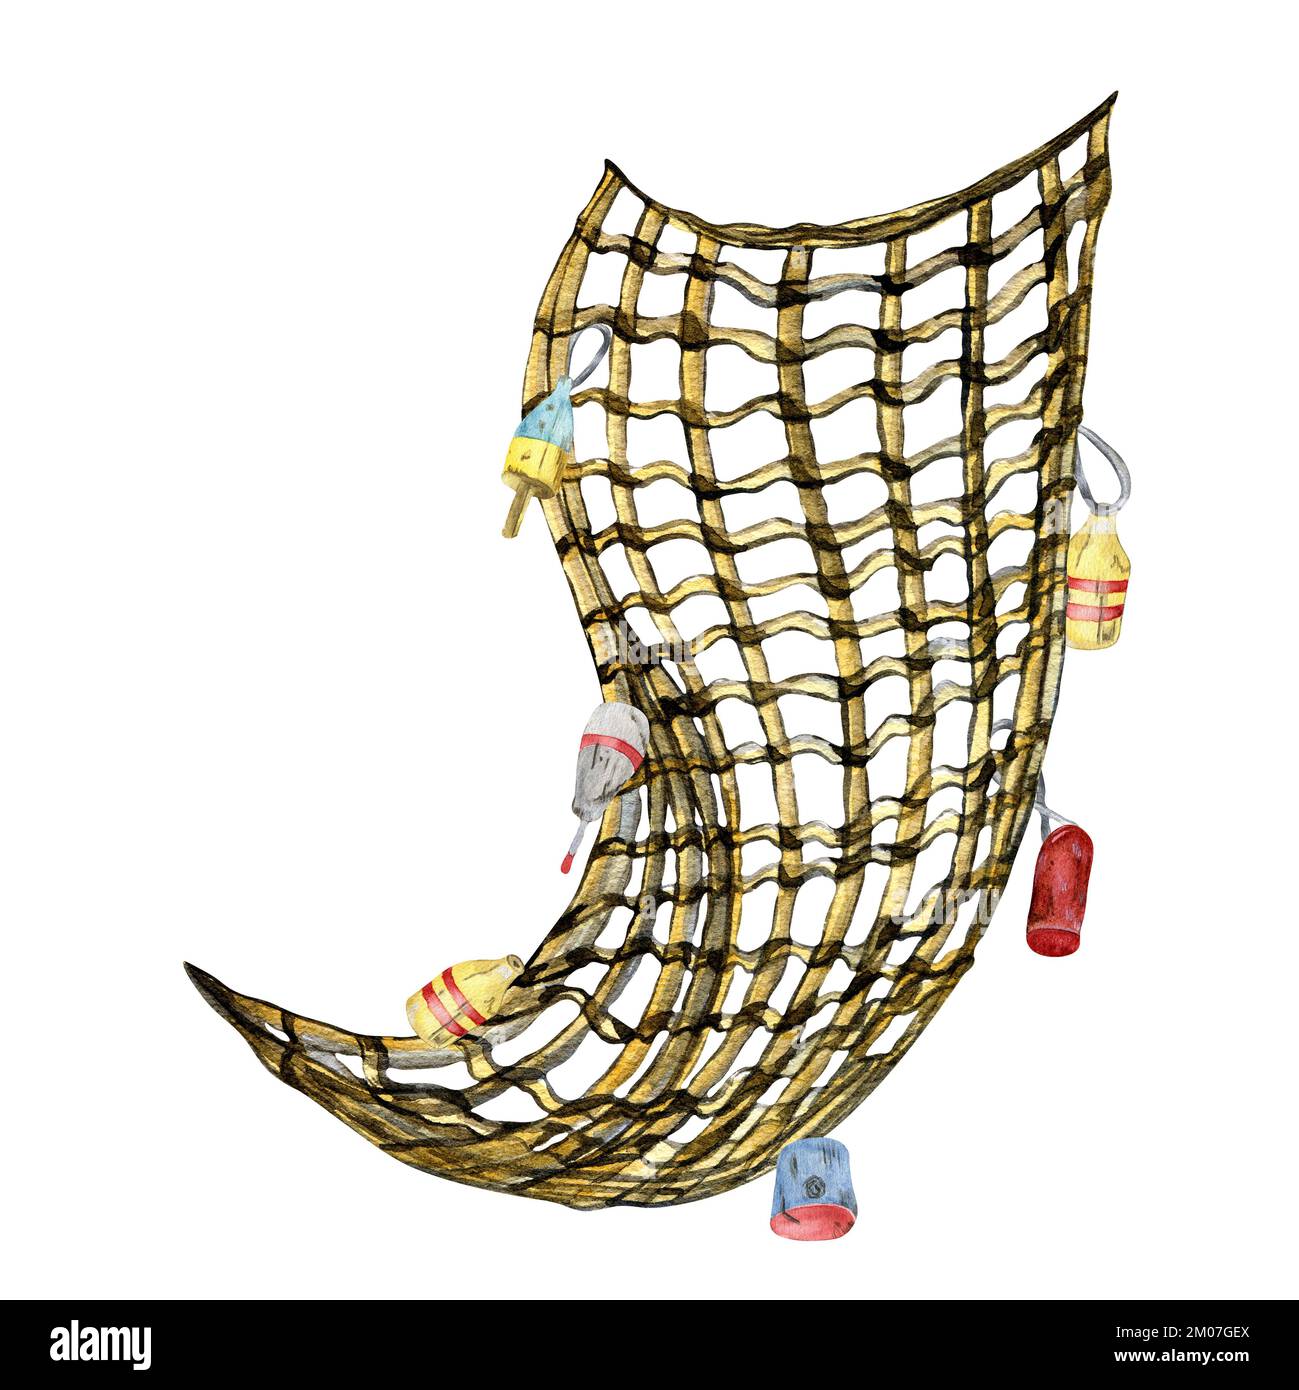 https://c8.alamy.com/comp/2M07GEX/fishing-net-and-buoy-watercolor-illustration-isolated-on-white-background-seine-fishnet-float-hand-drawn-design-element-for-banner-label-market-2M07GEX.jpg